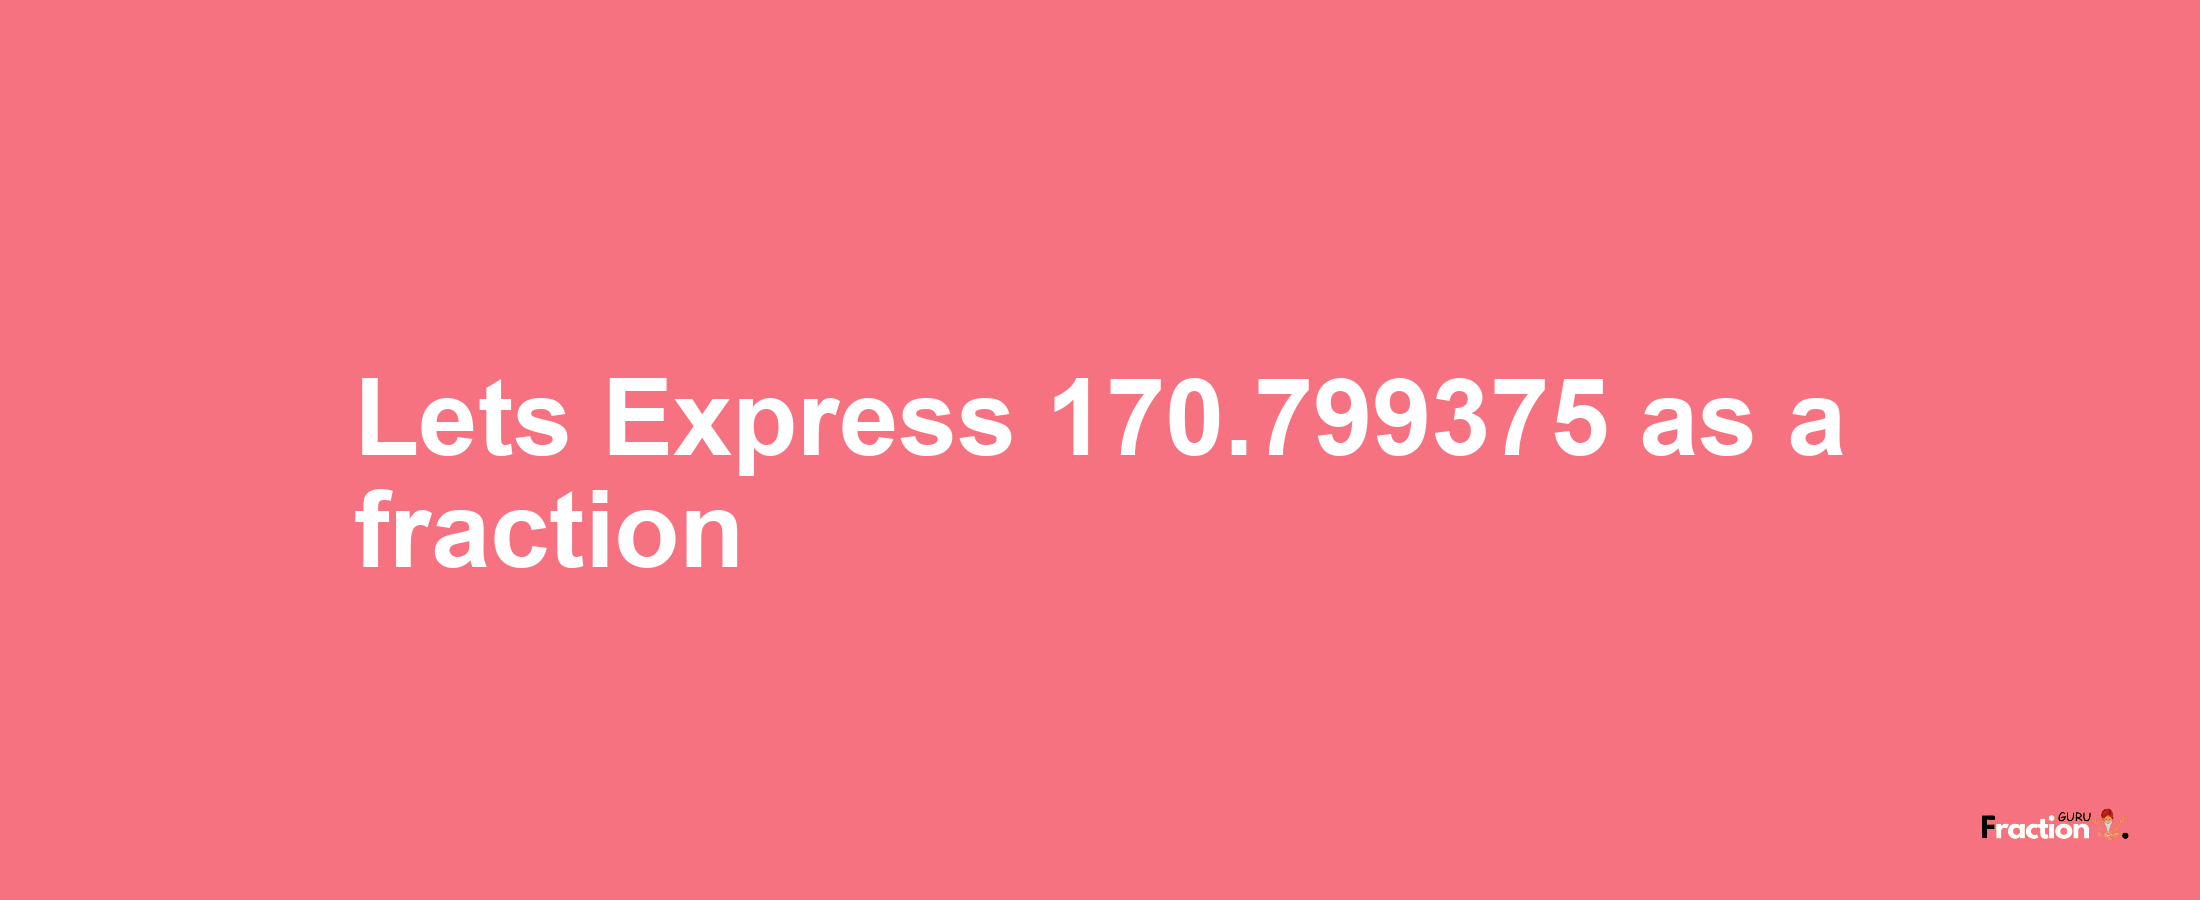 Lets Express 170.799375 as afraction